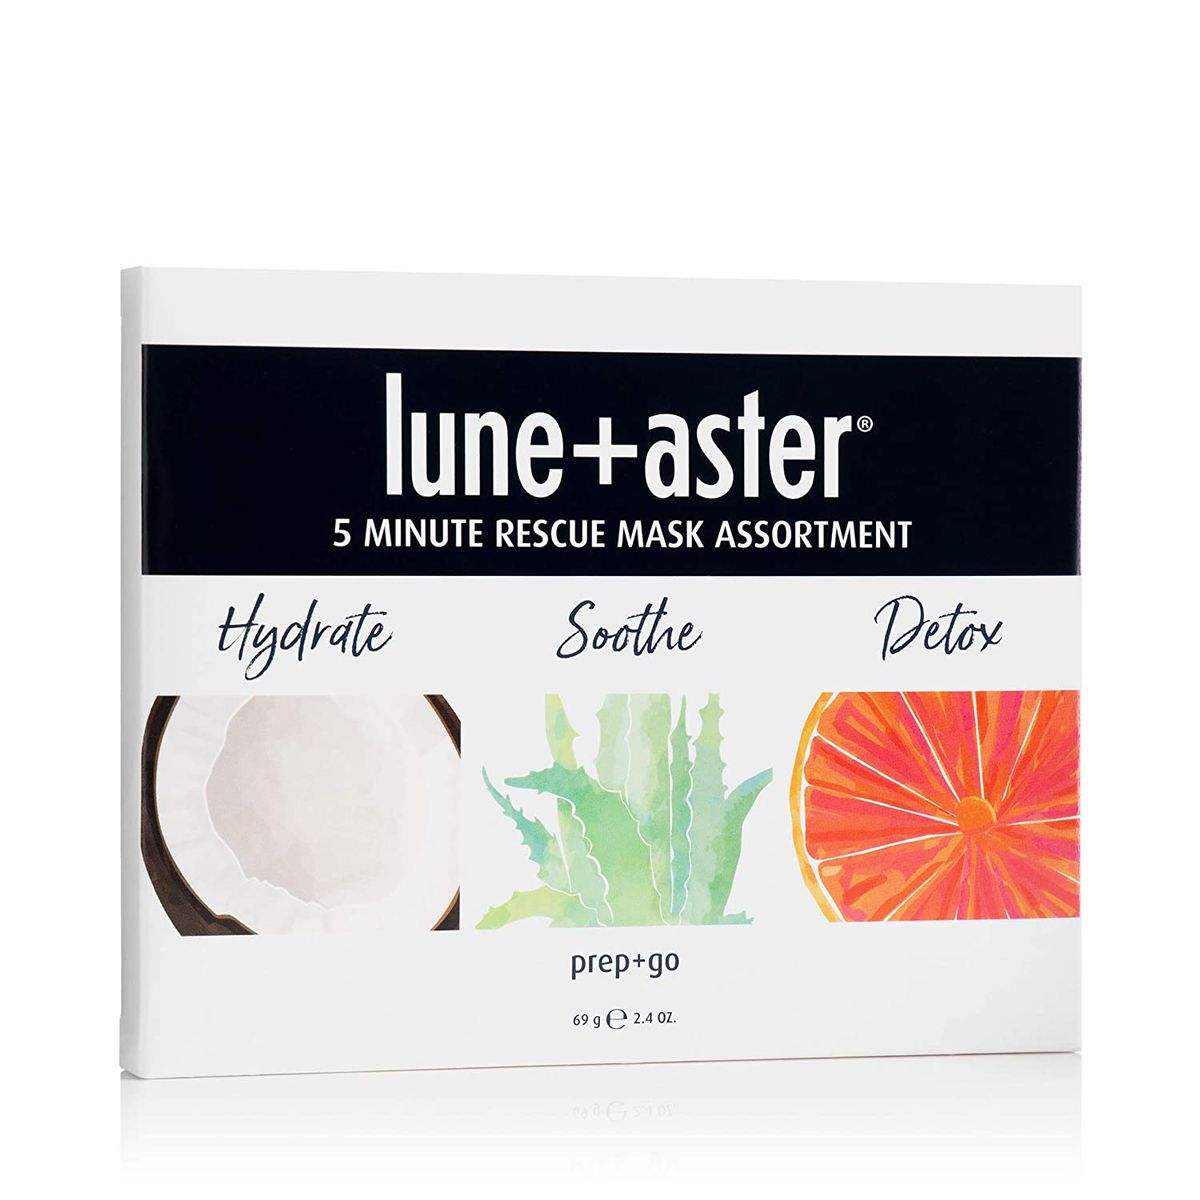 Lune+Aster 5 Minute Rescue Mask Assortment Trio: Hydrate, Soothe, and Detox